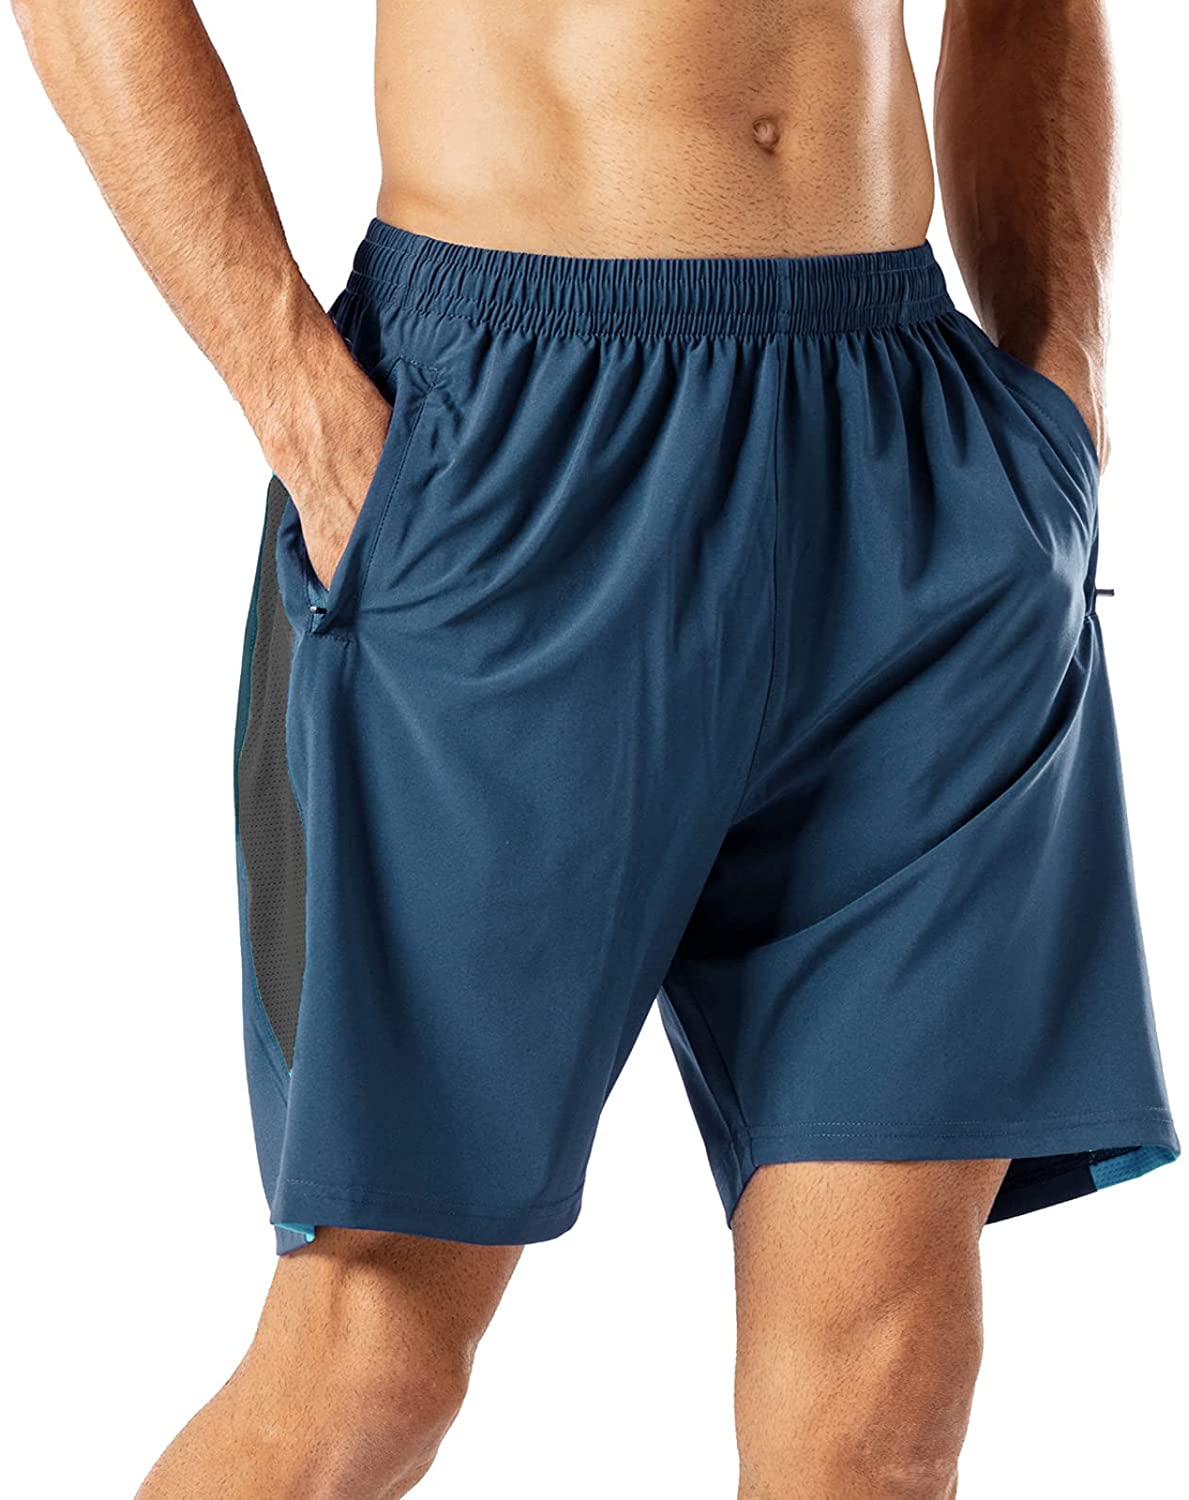 HMIYA Mens Sports Shorts Quick Dry with Zip Pockets for Workout Running Training 